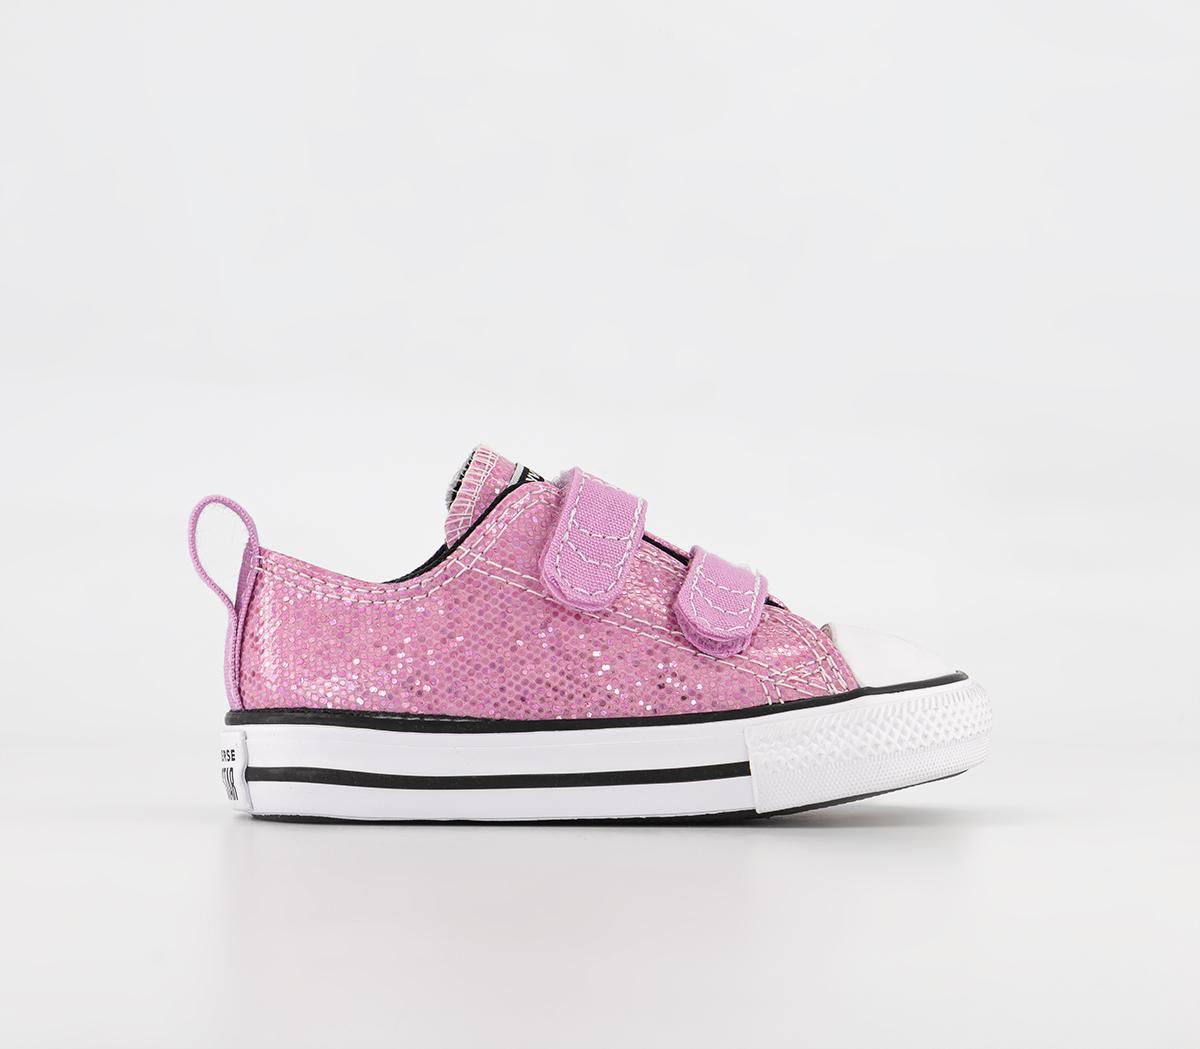 ConverseAll Star 2vlace TrainersPink Beyond Pink Black